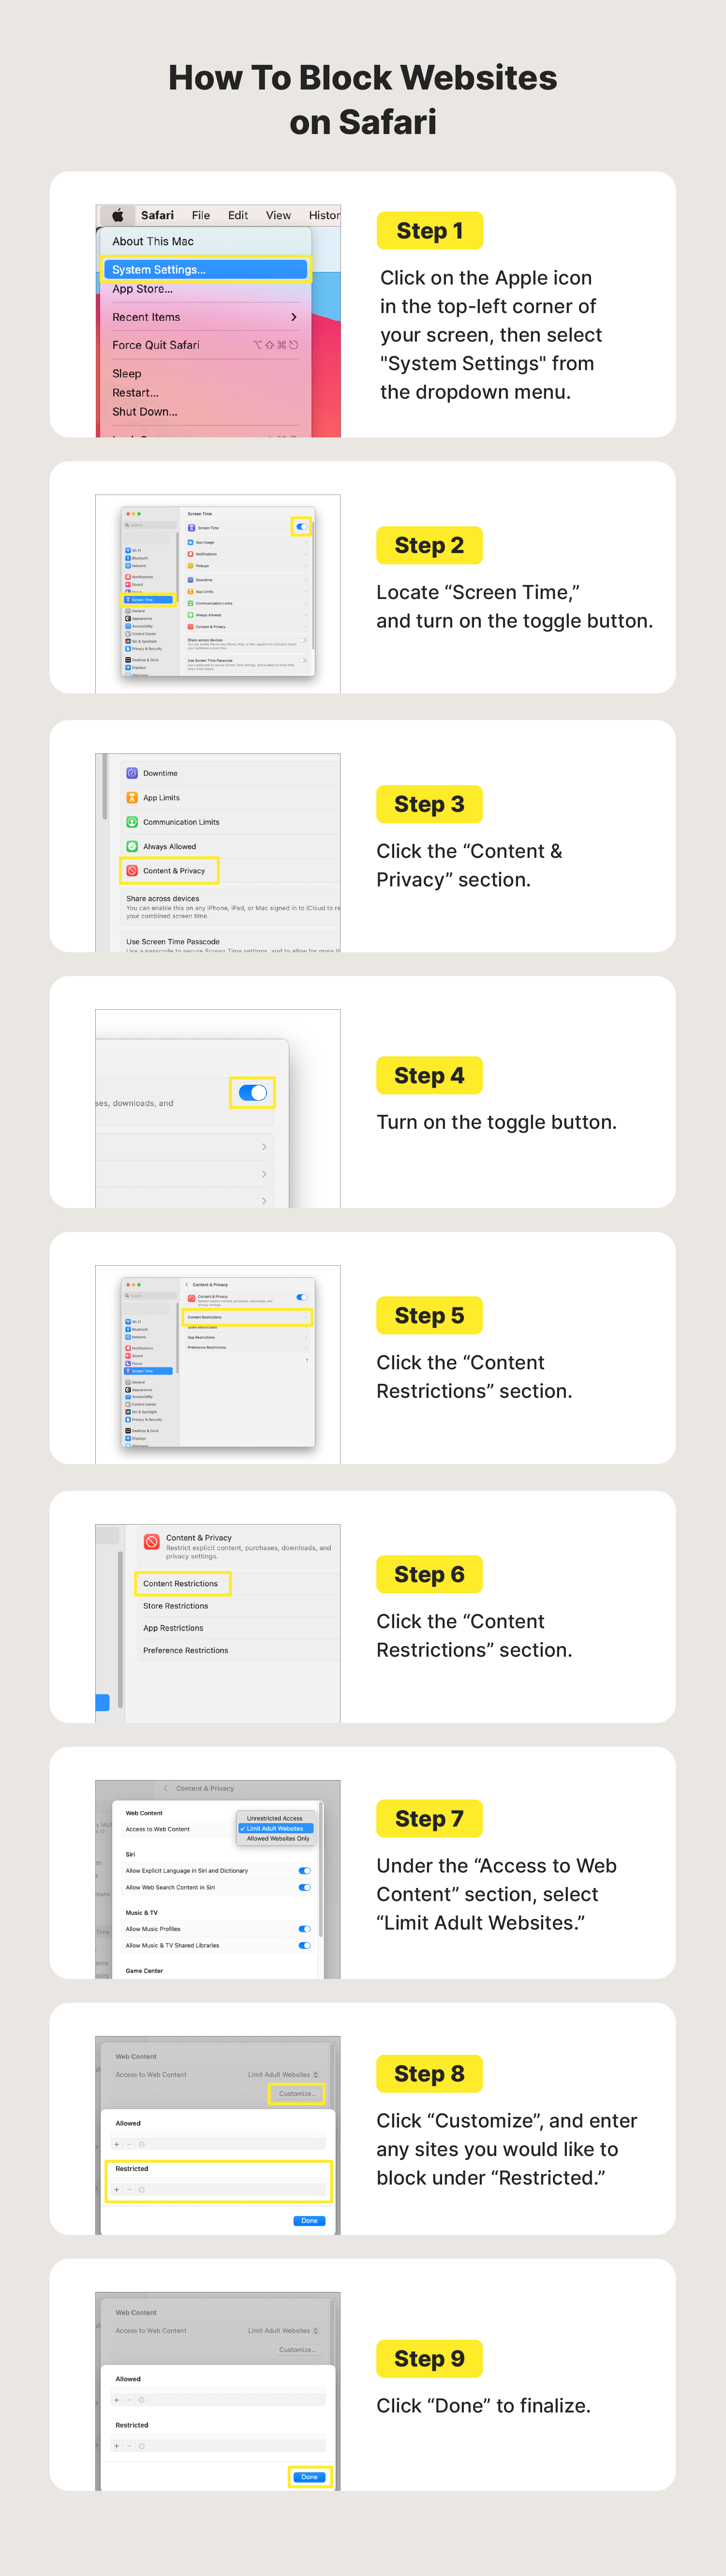 Step-by-step list showing how to block websites on Safari